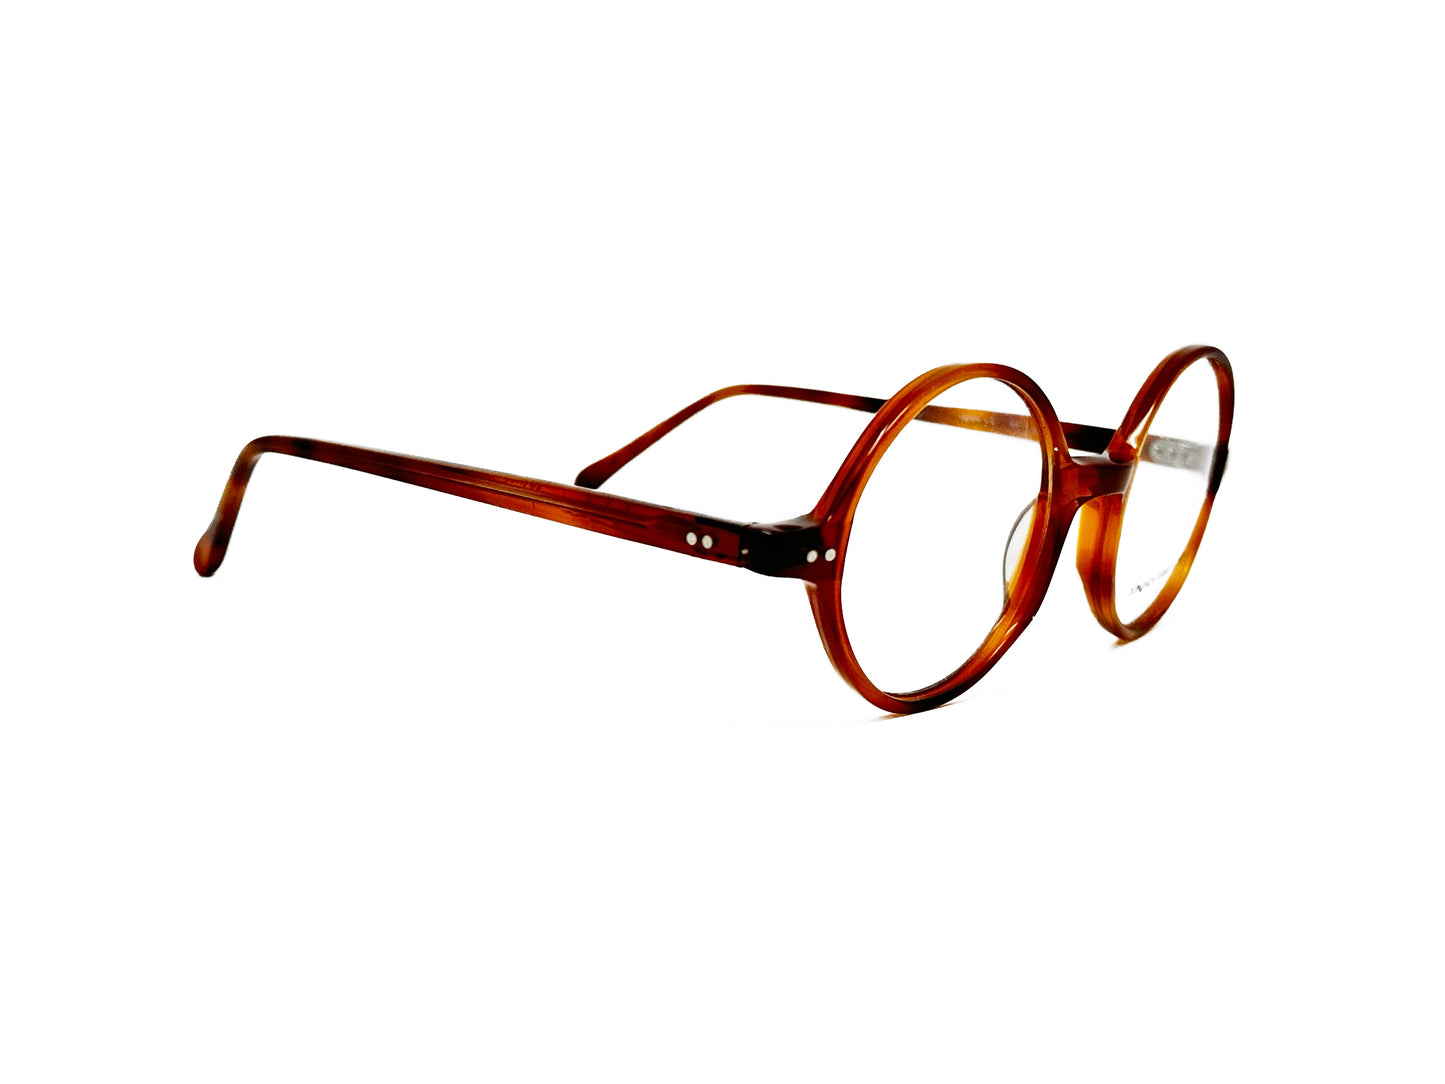 Anglo American Optical round acetate optical frame with angled corners below nose bridge. Model: Angled Round. Color: Tort - Brown tortoise. Side view.